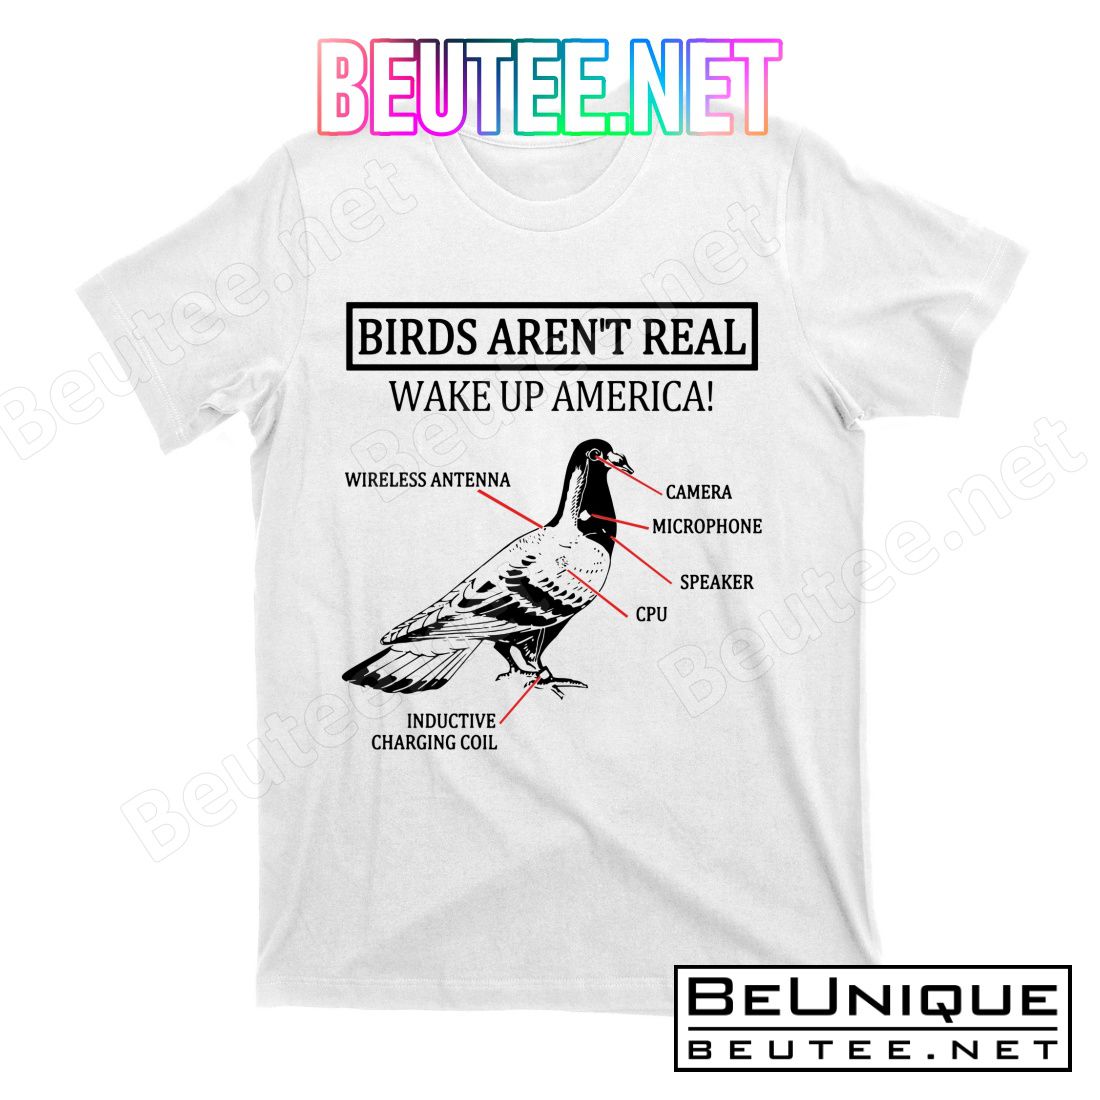 Birds Arent Real T-Shirts